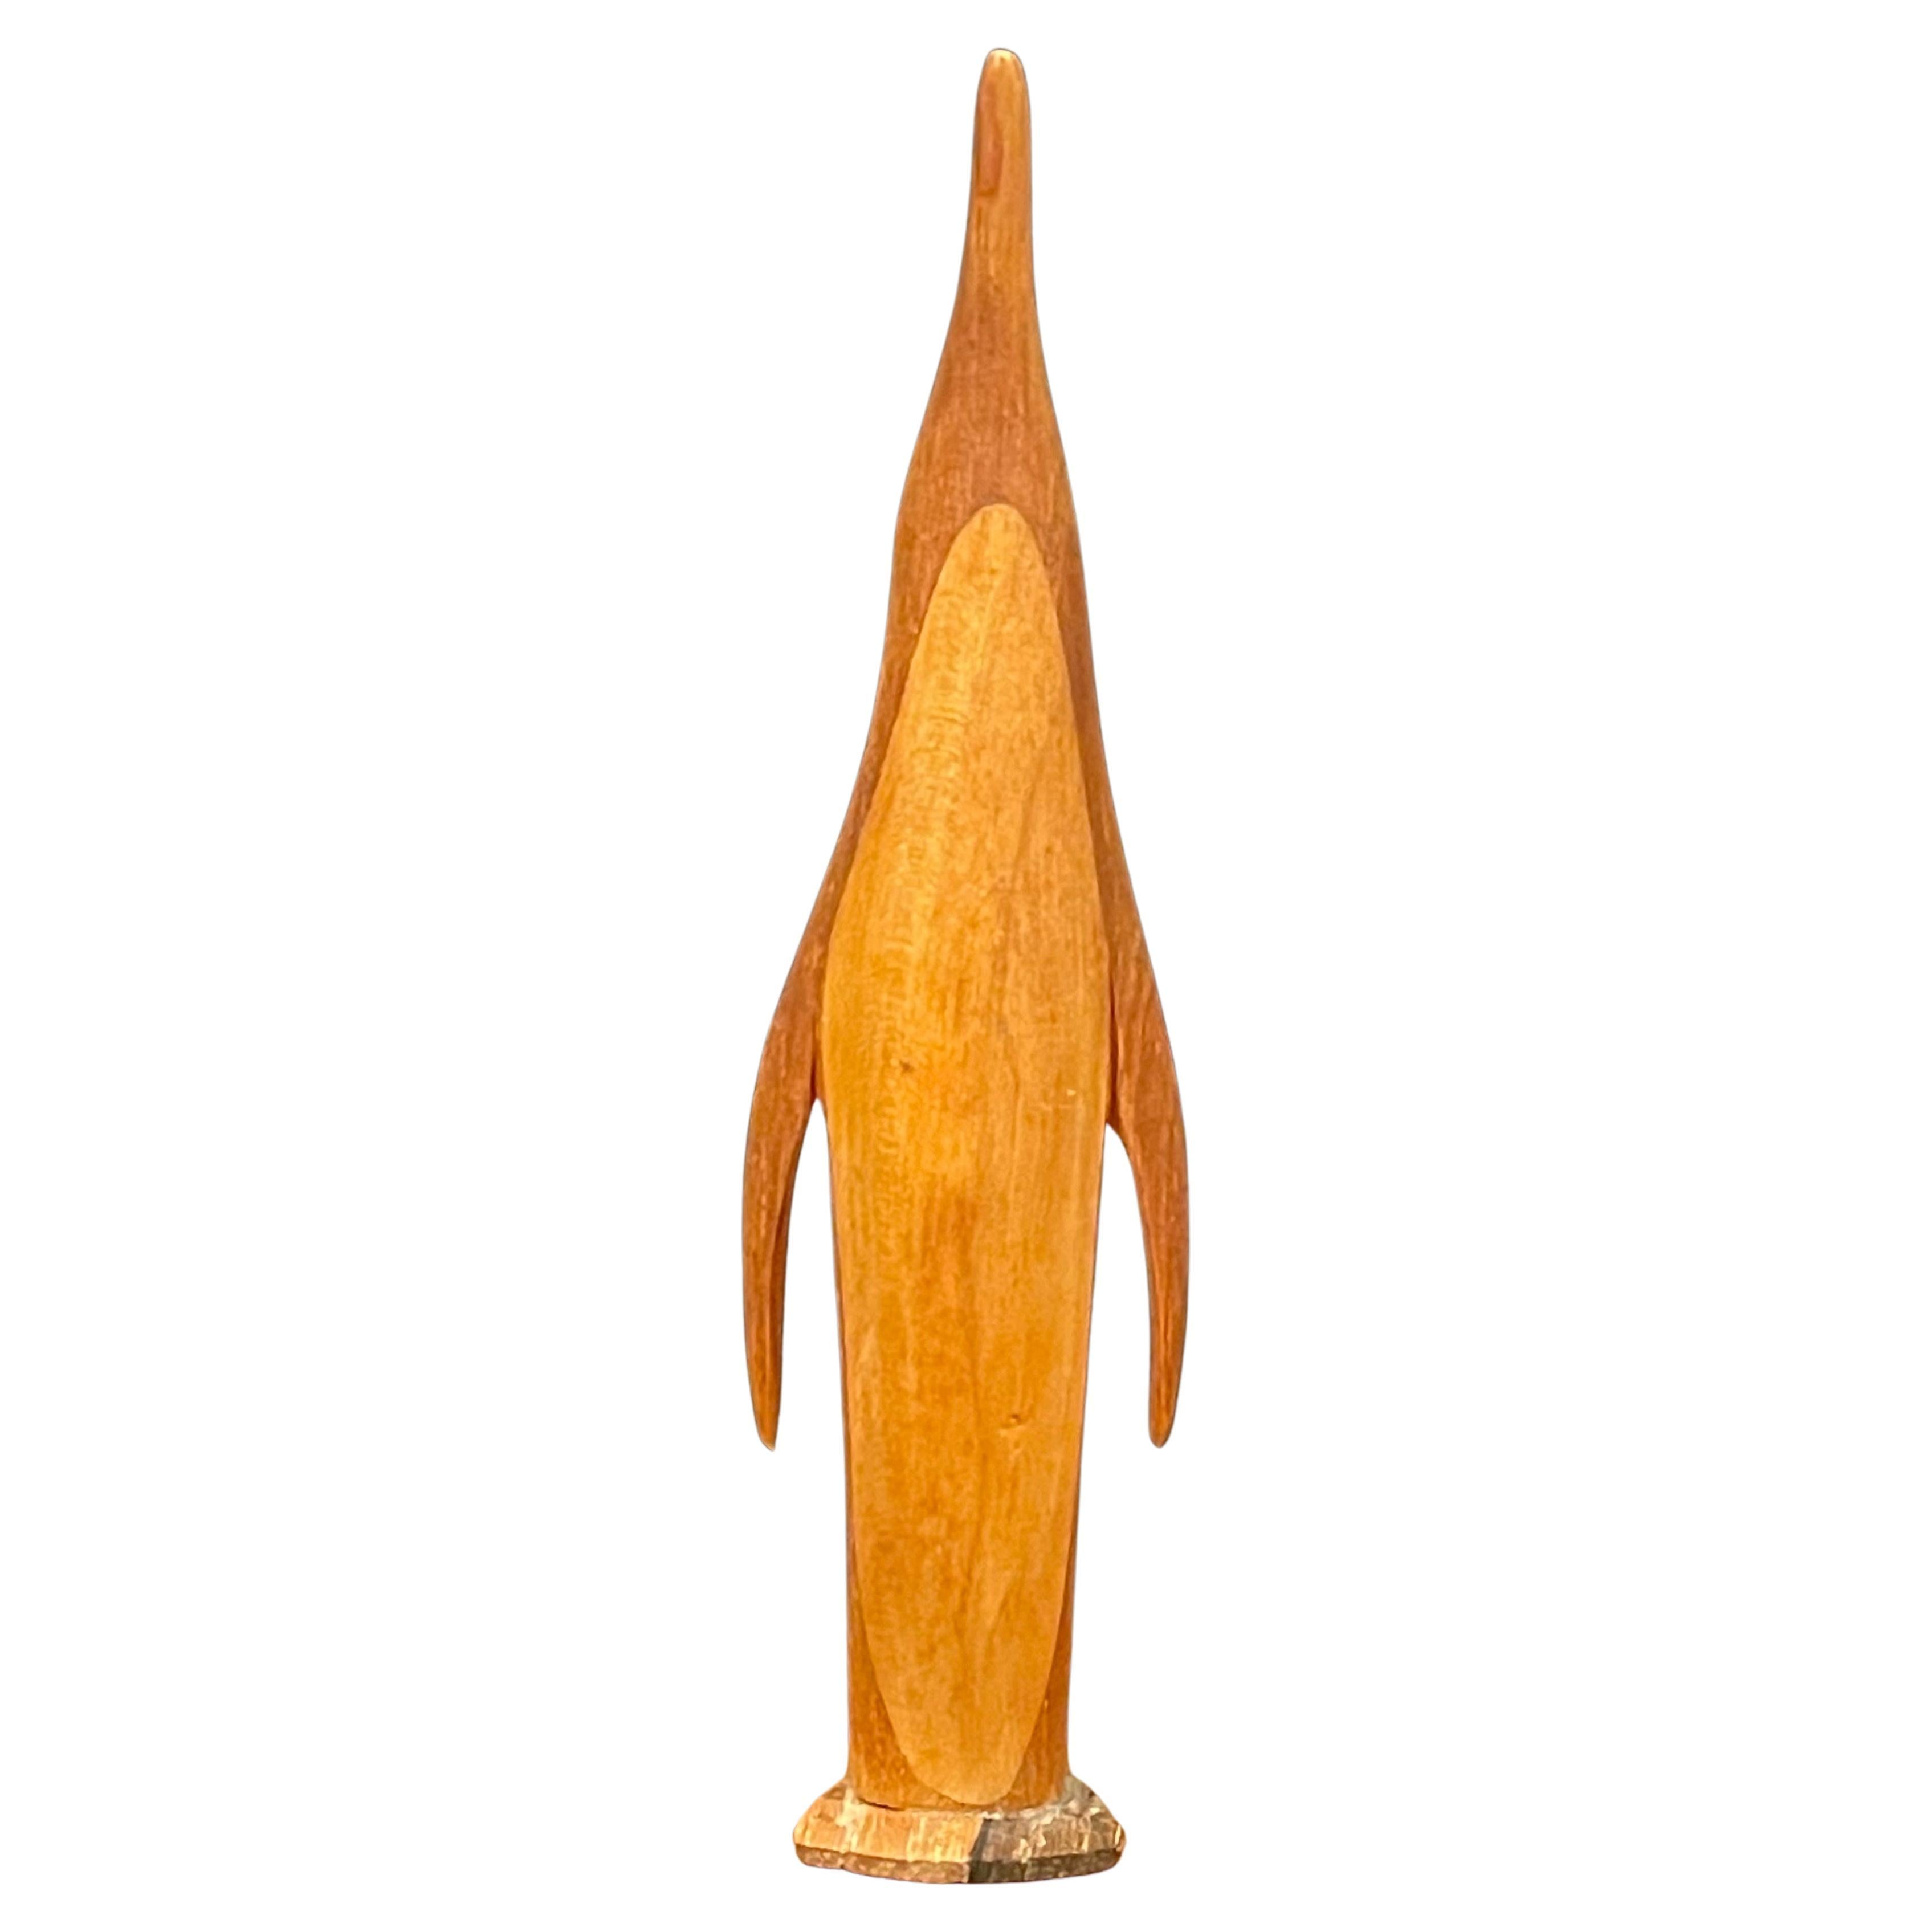 MCM teak penguin sculpture, circa 1960s. The piece is finely crafted and made of teak with a second lighter unidentified wood. The penguin is in good vintage condition and measures 1.5